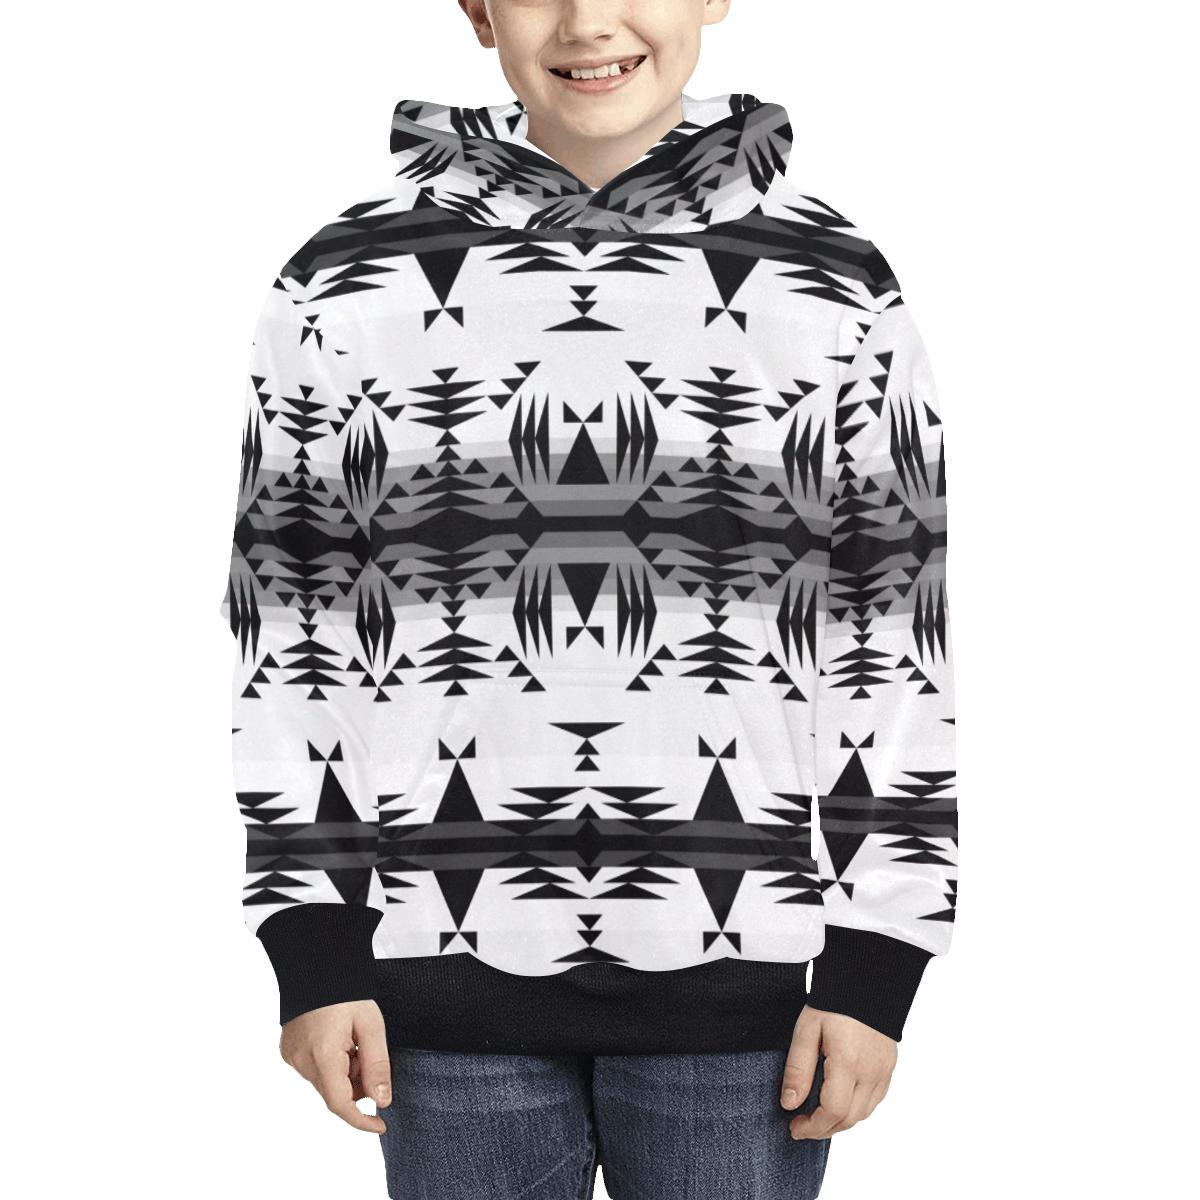 Between the Mountains White and Black Kids' All Over Print Hoodie (Model H38) Kids' AOP Hoodie (H38) e-joyer 